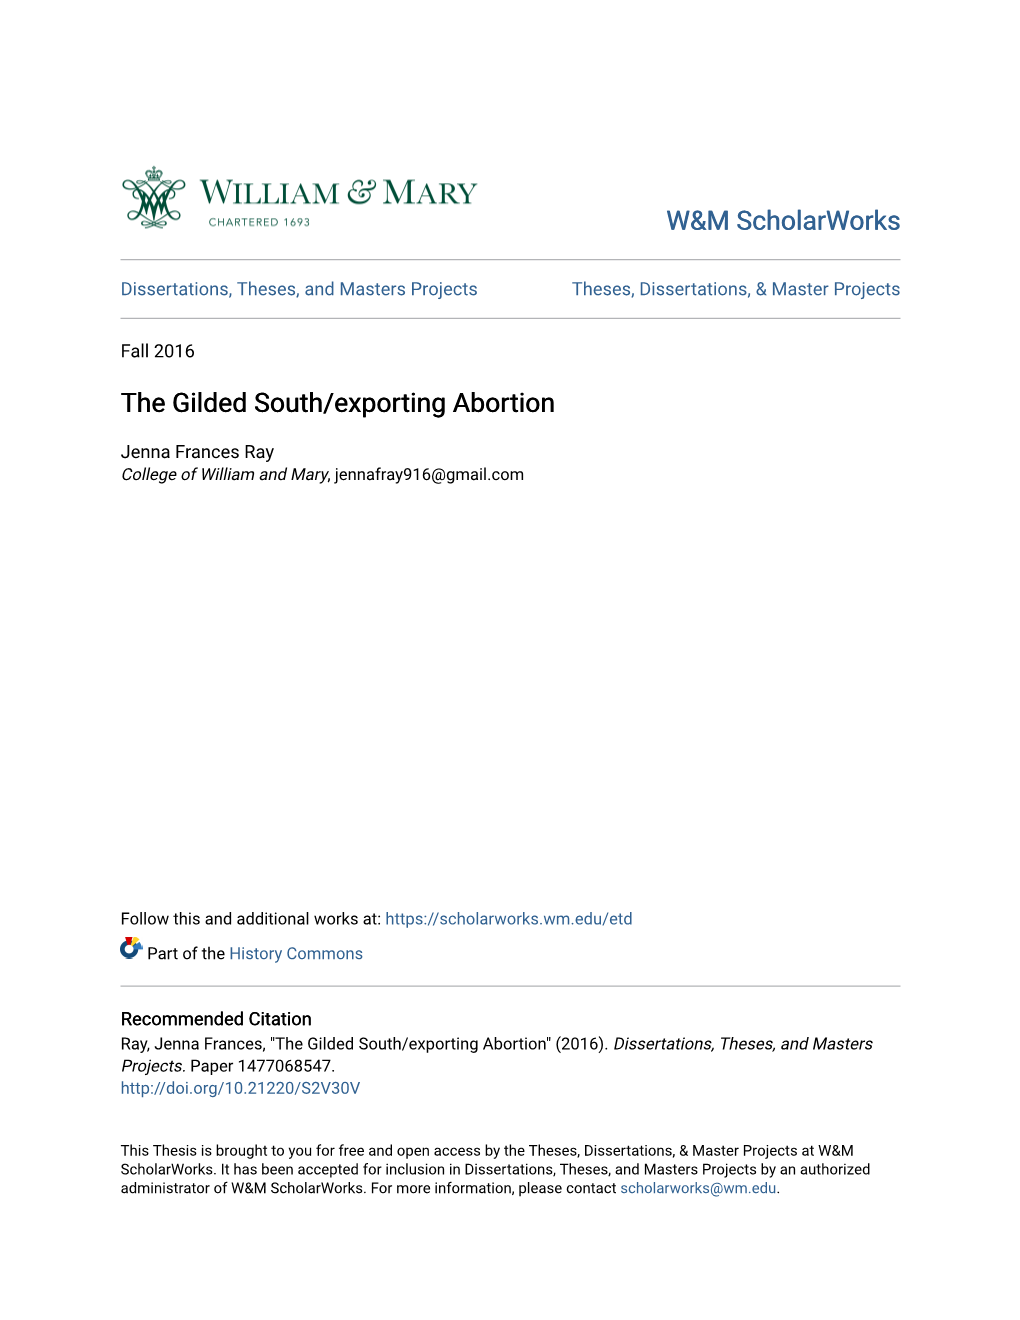 The Gilded South/Exporting Abortion